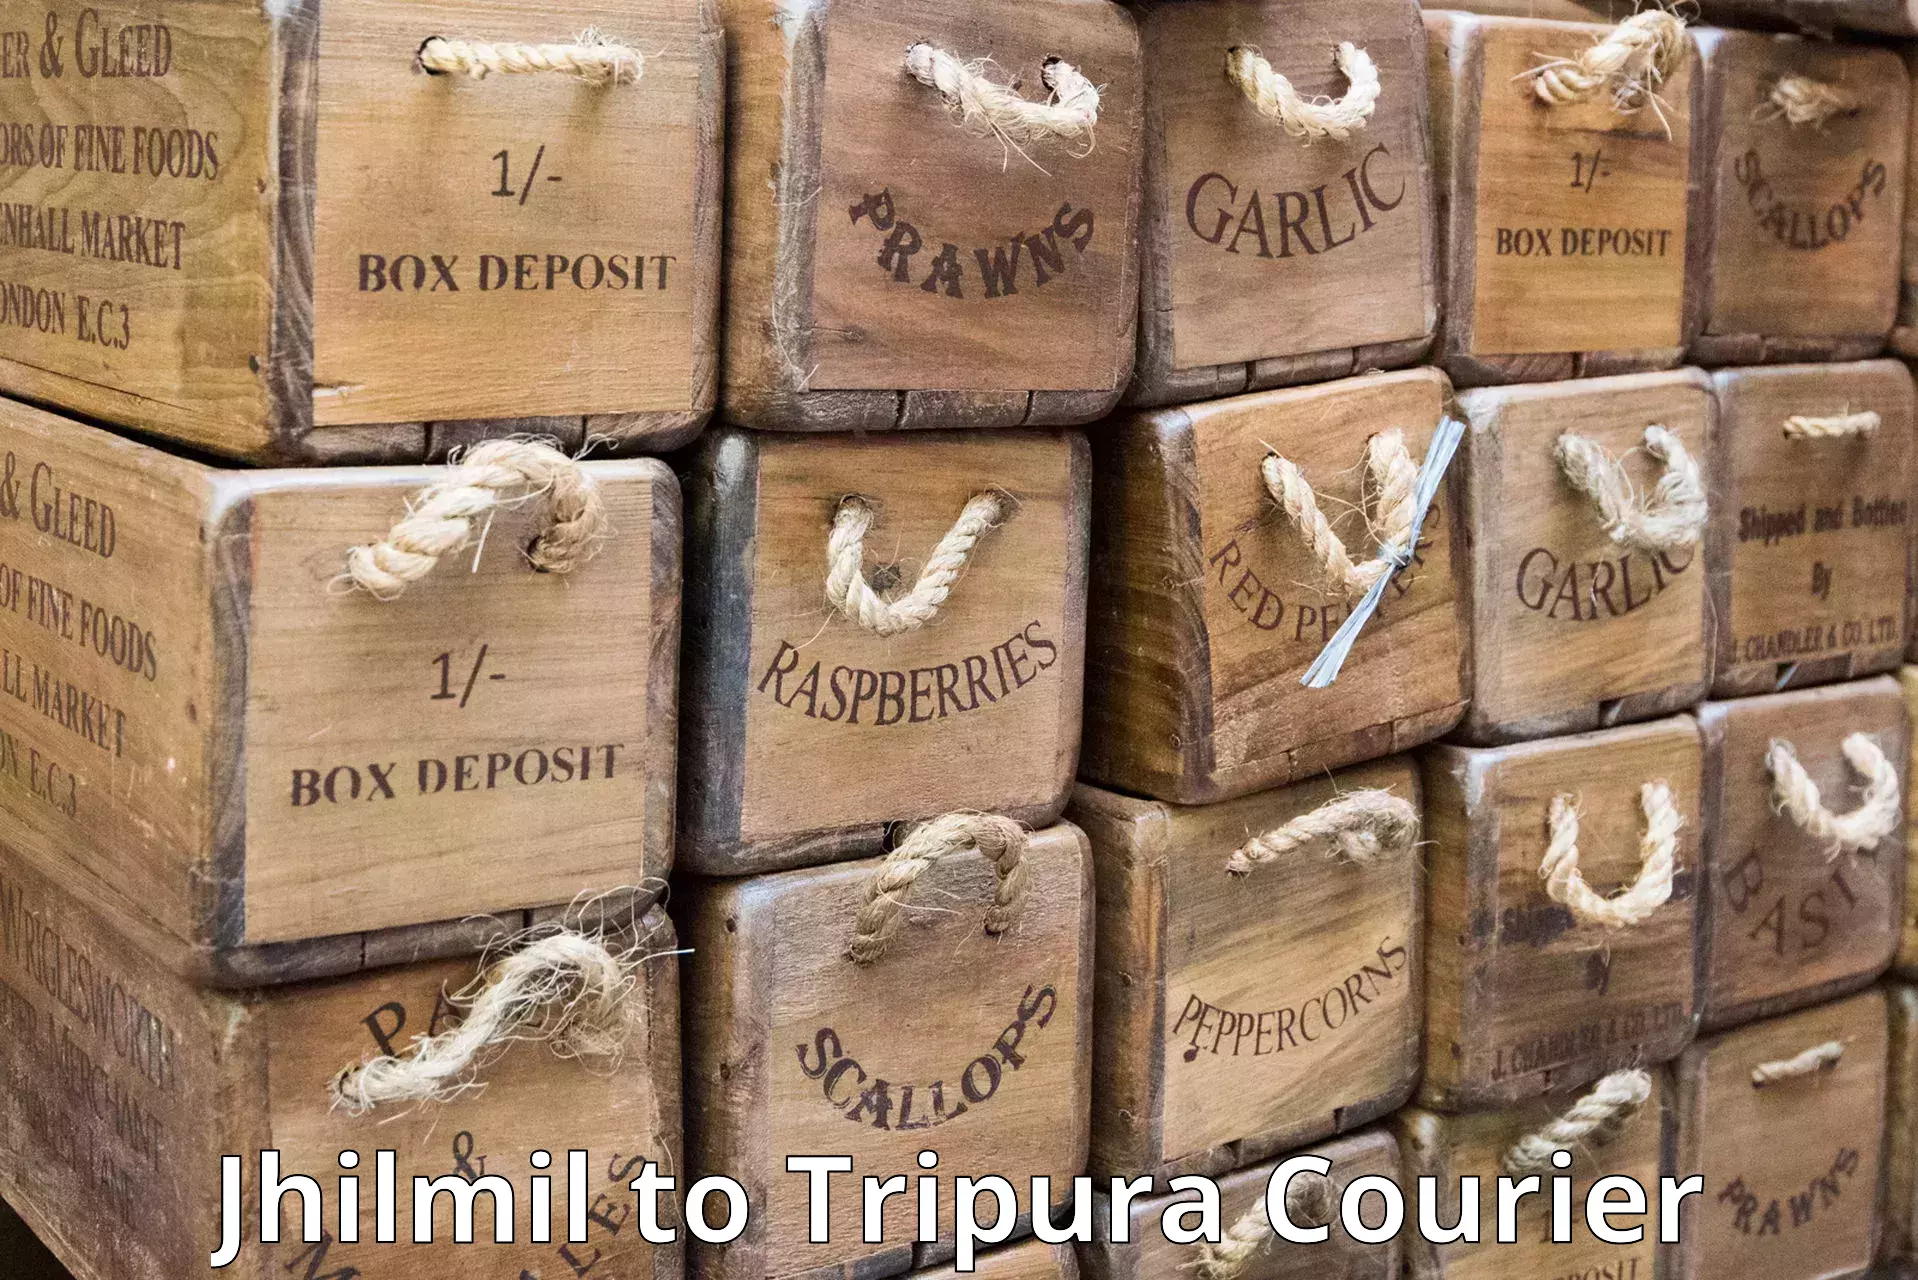 On-demand shipping options Jhilmil to Udaipur Tripura